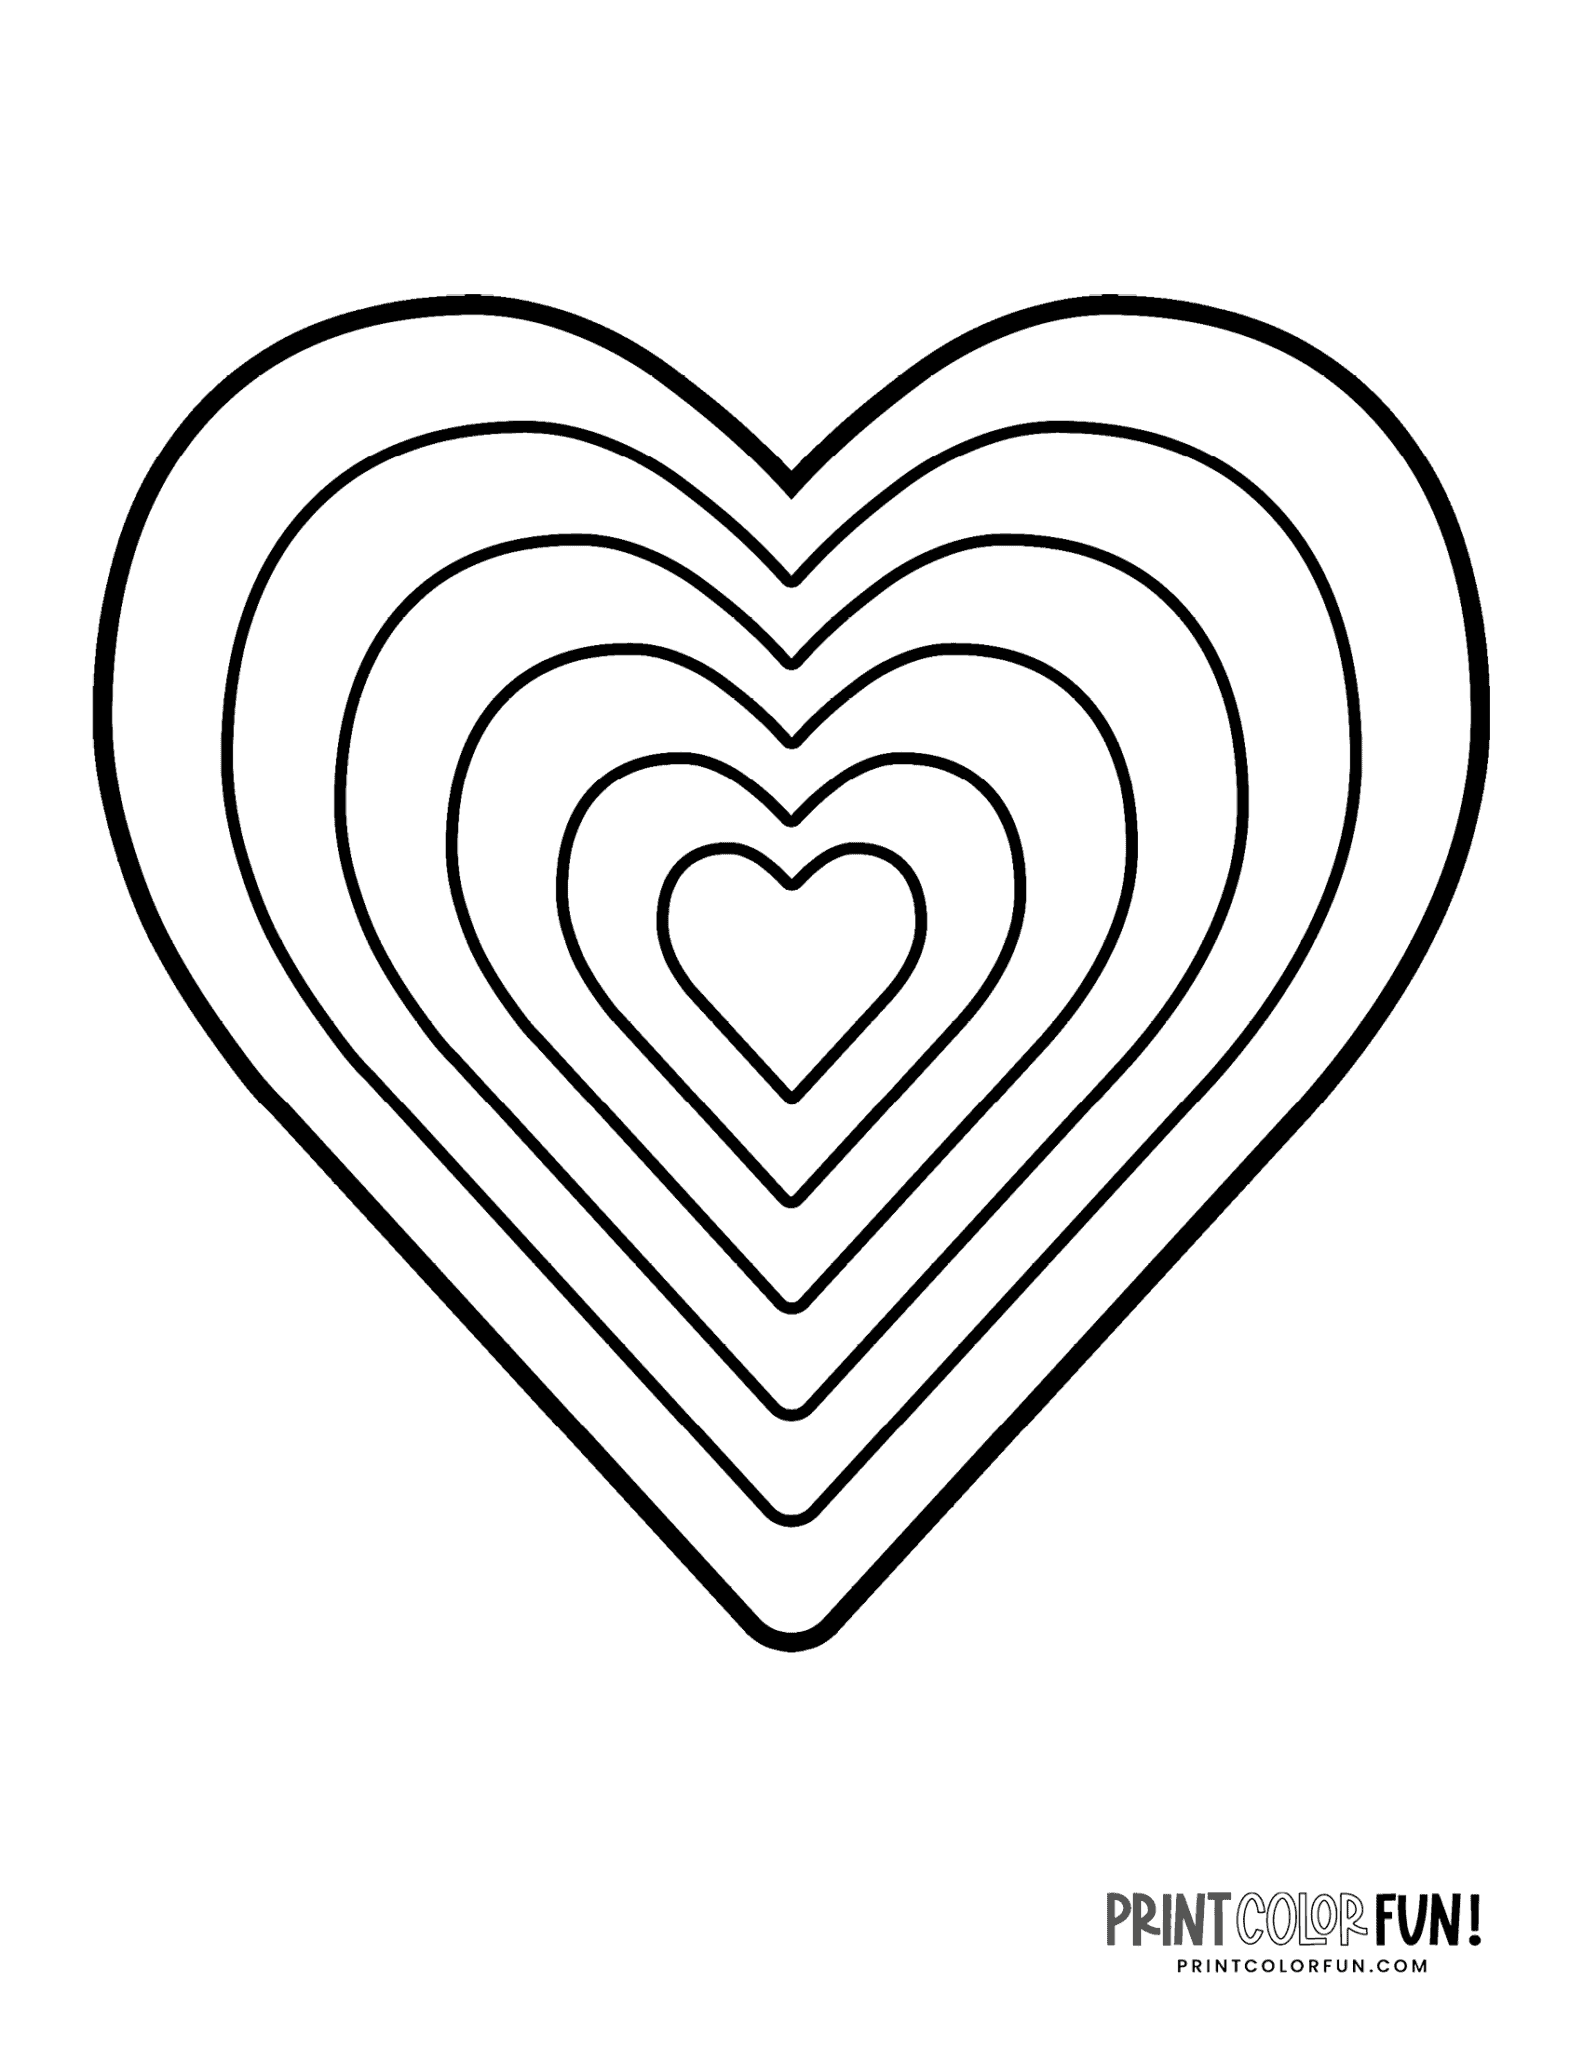 100 Heart Coloring Pages A Huge Collection Of Free Valentine s Day Printables Print Color Fun 